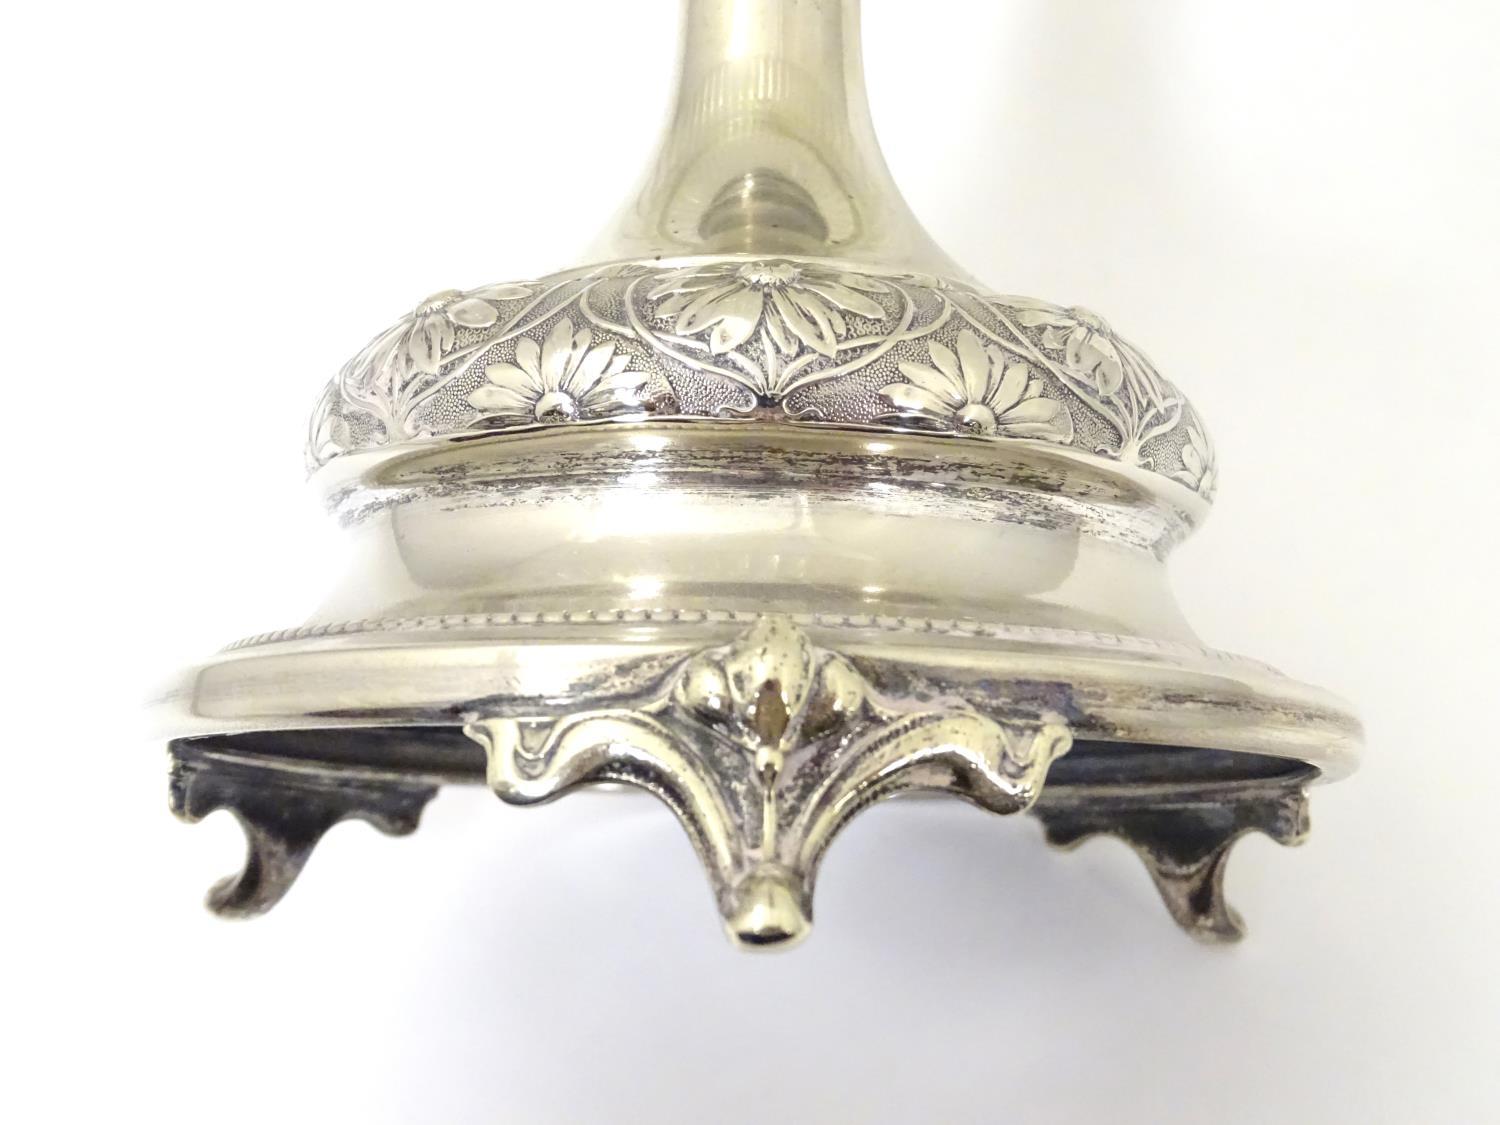 A late 19thC / early 20thC silver plate and glass centre piece with provision for epergne glass - Image 8 of 8